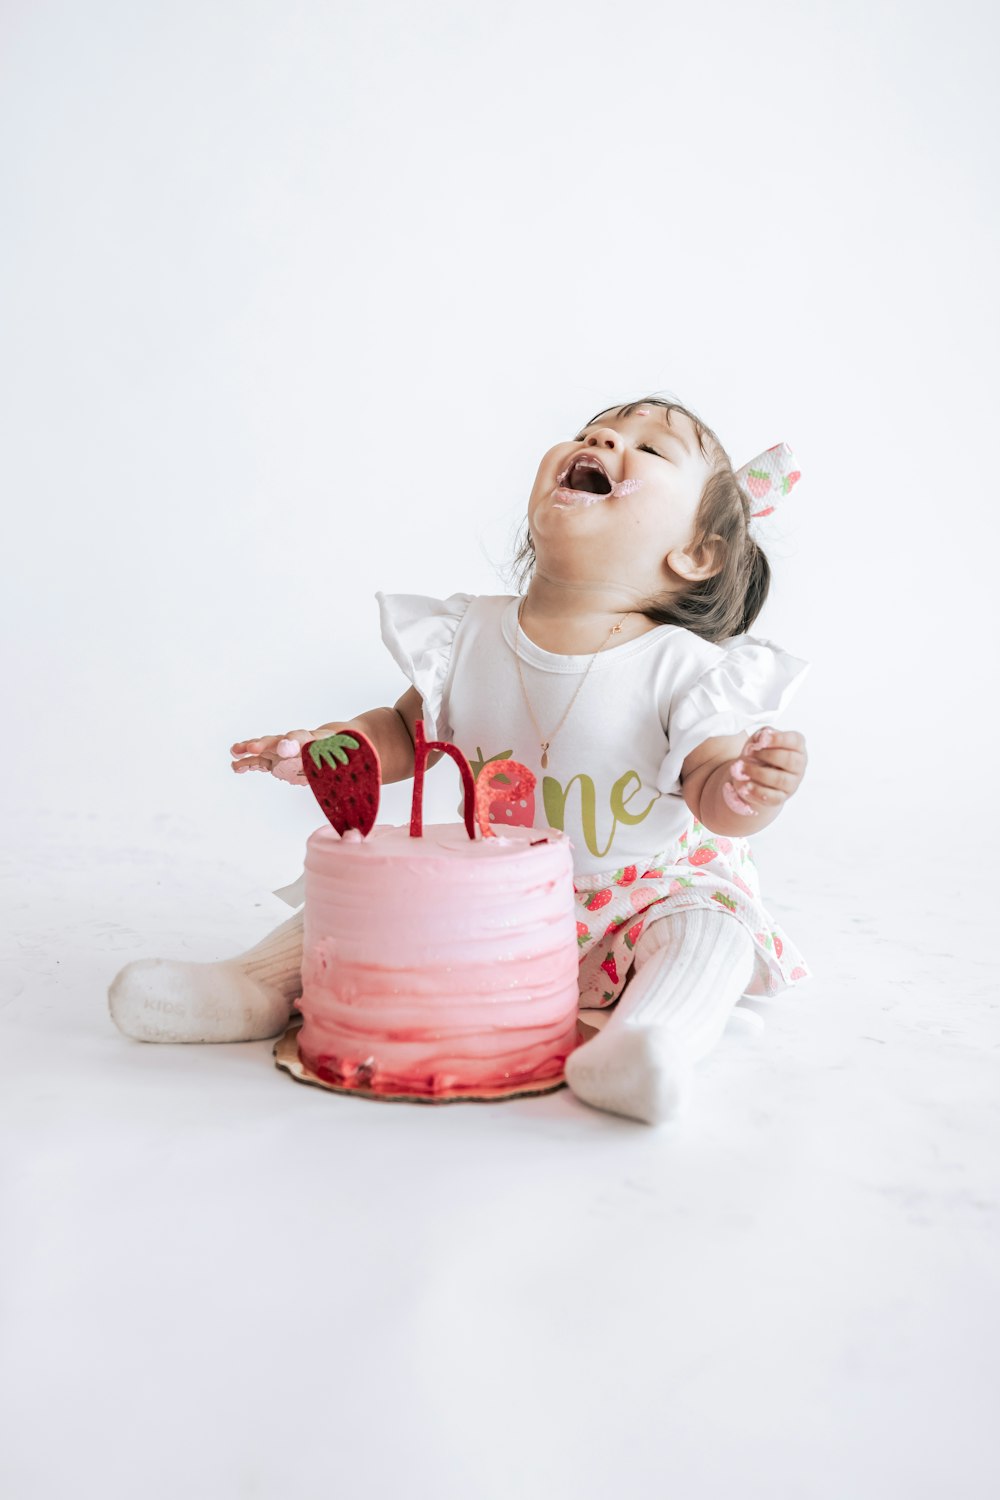 A little girl sitting in front of a pink cake photo – Free Cake Image on Unsplash